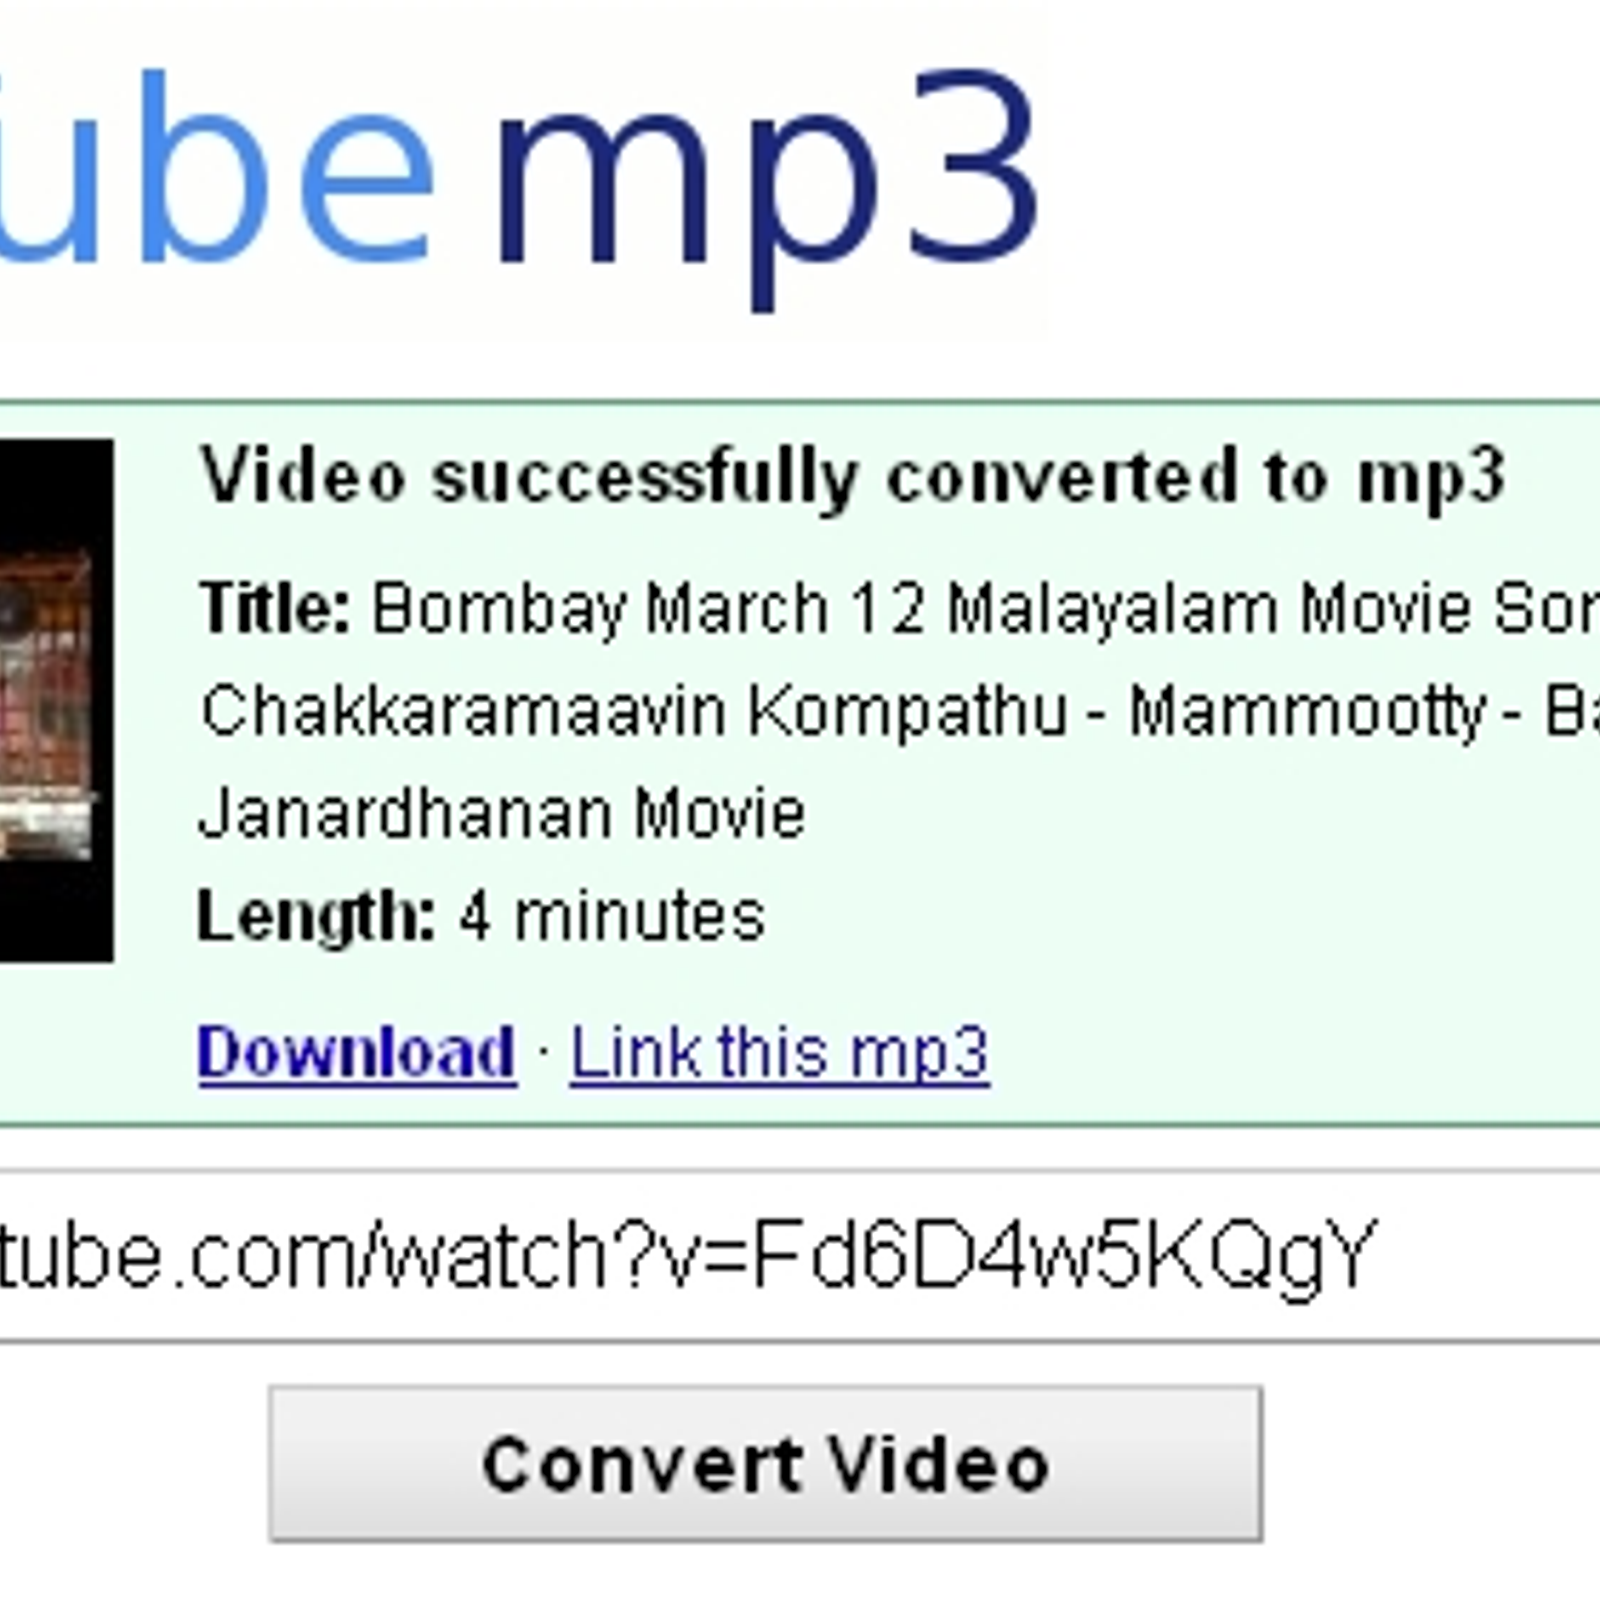 youtube to mp3 application pc